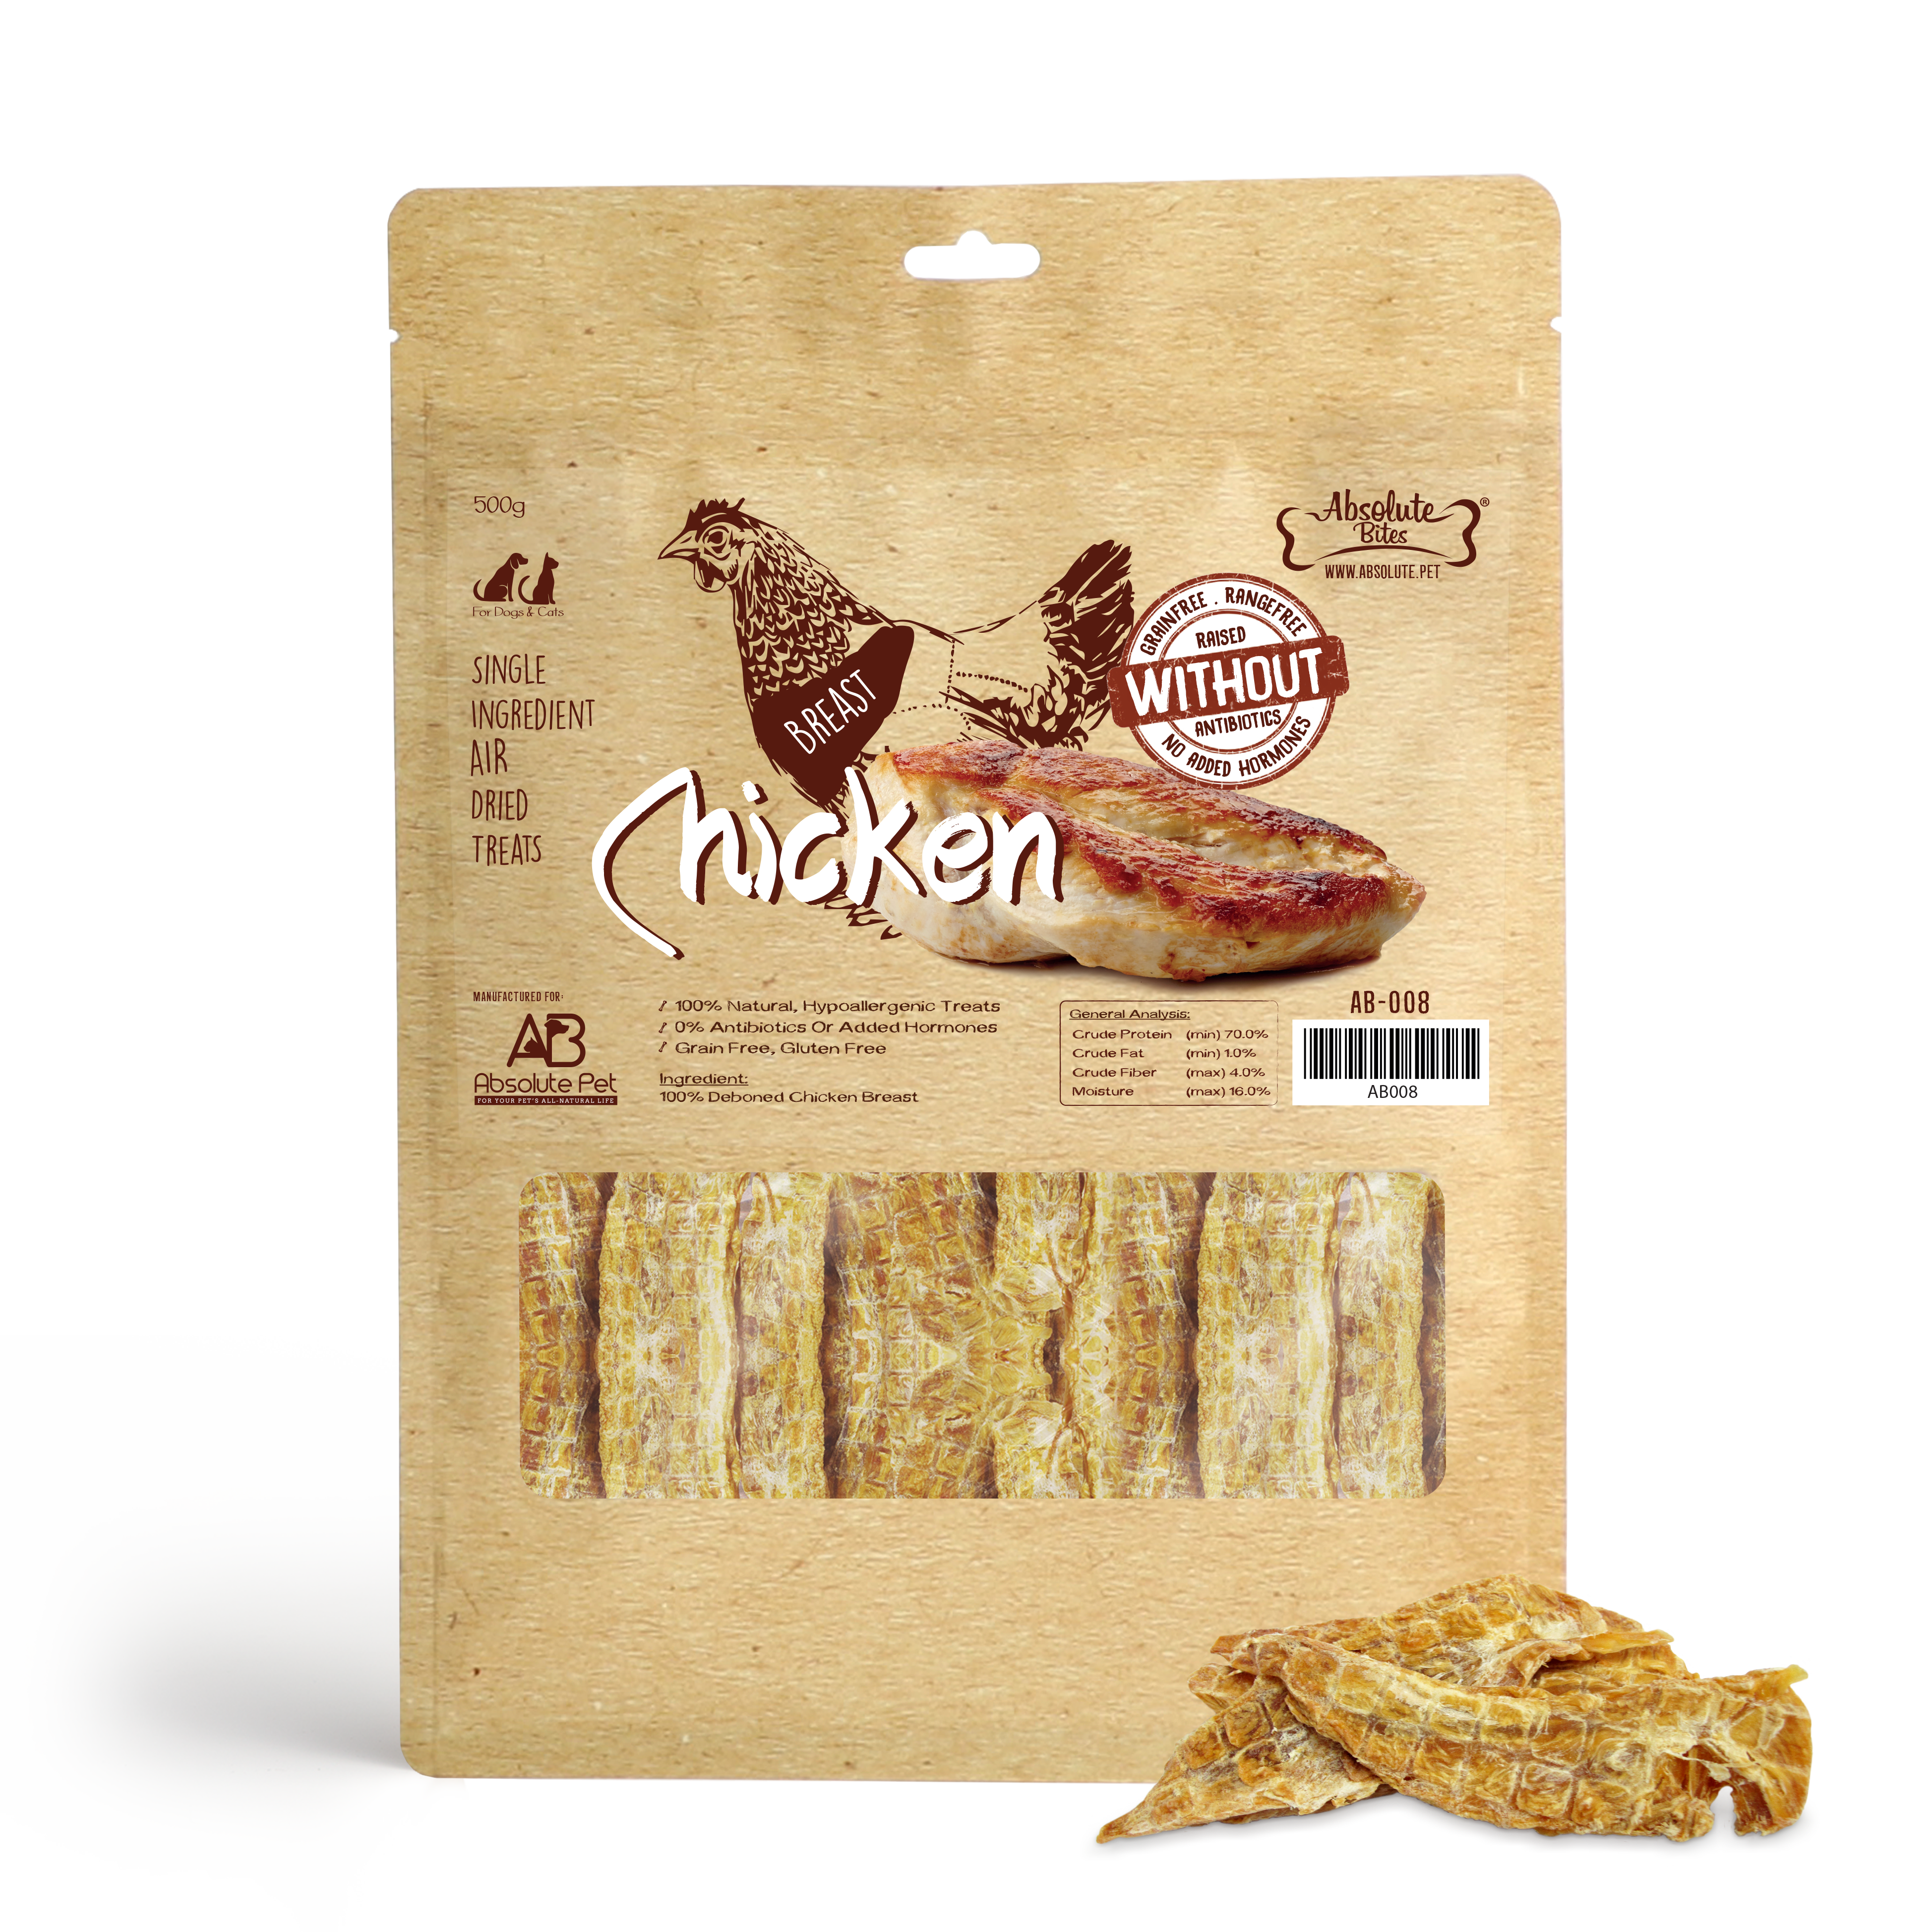 Absolute Bites - Air Dried Chicken Breast for Dogs & Cats (2 Sizes)